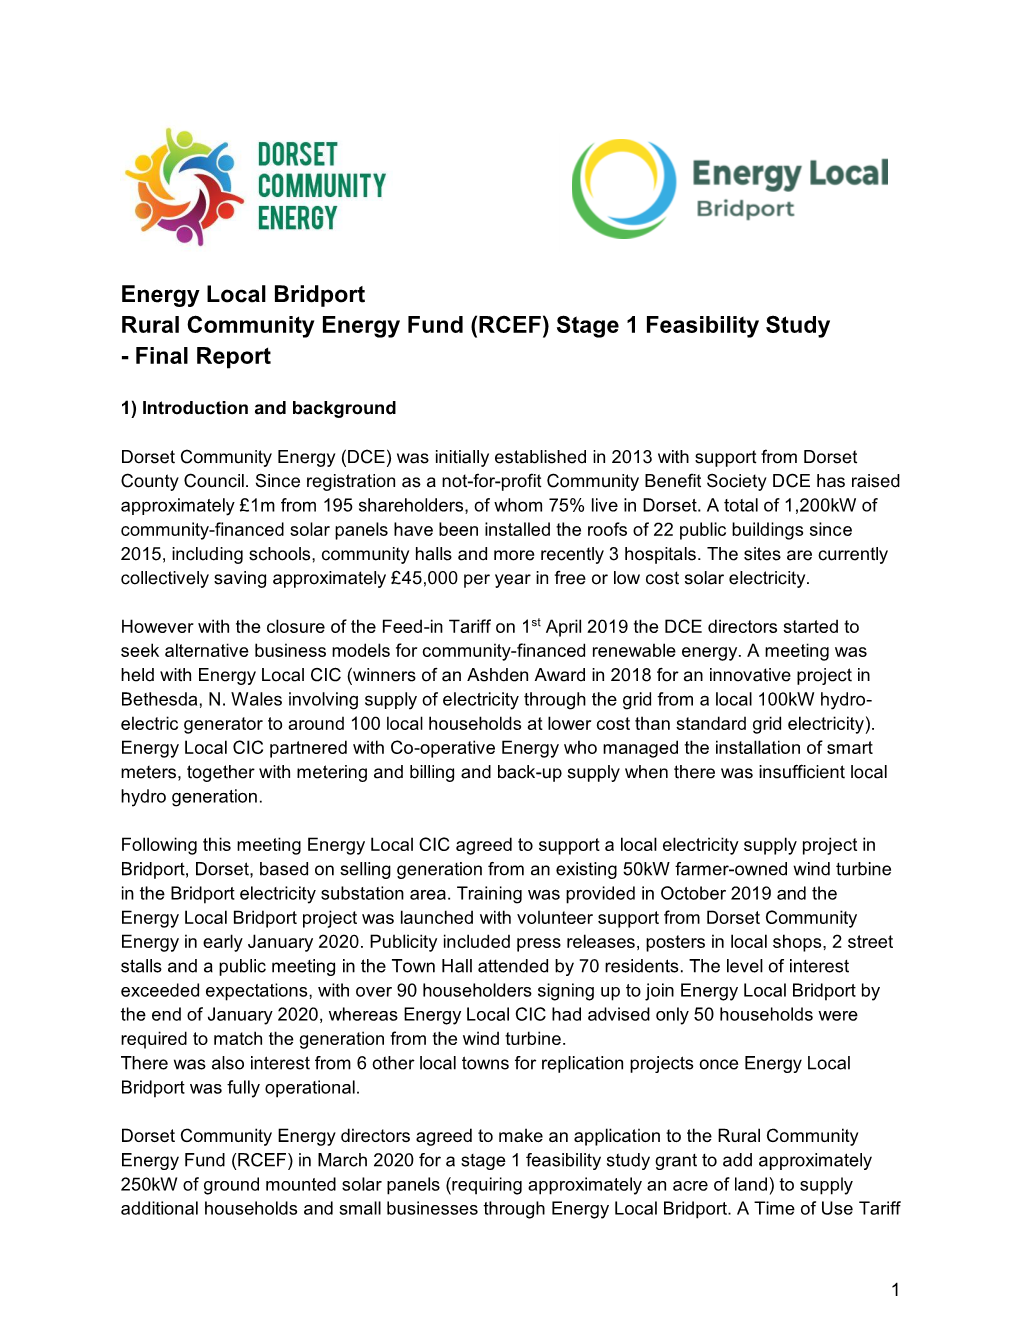 RCEF) Stage 1 Feasibility Study - Final Report